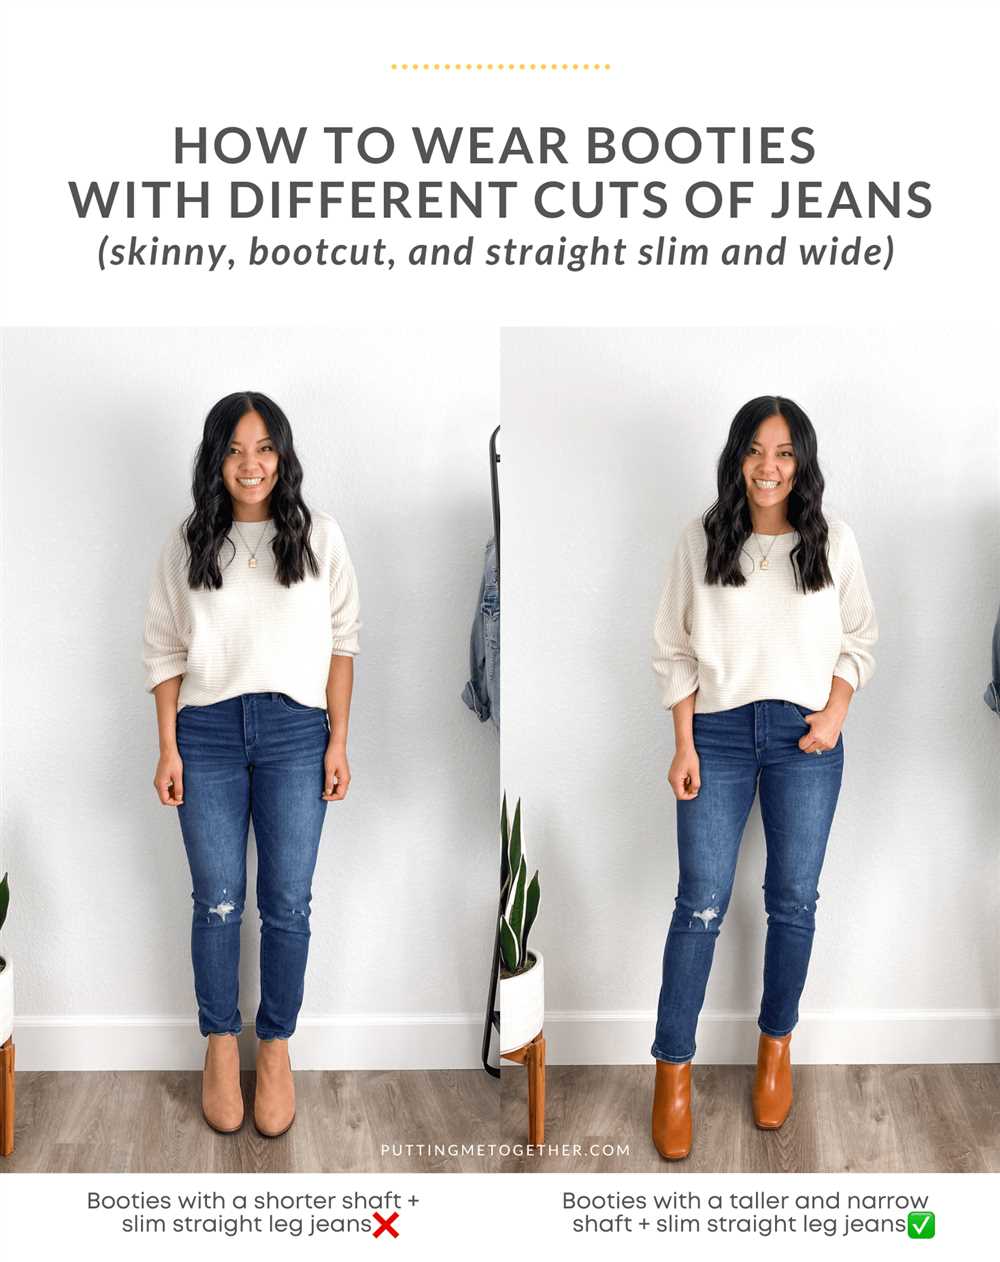 How to wear thigh high boots with jeans